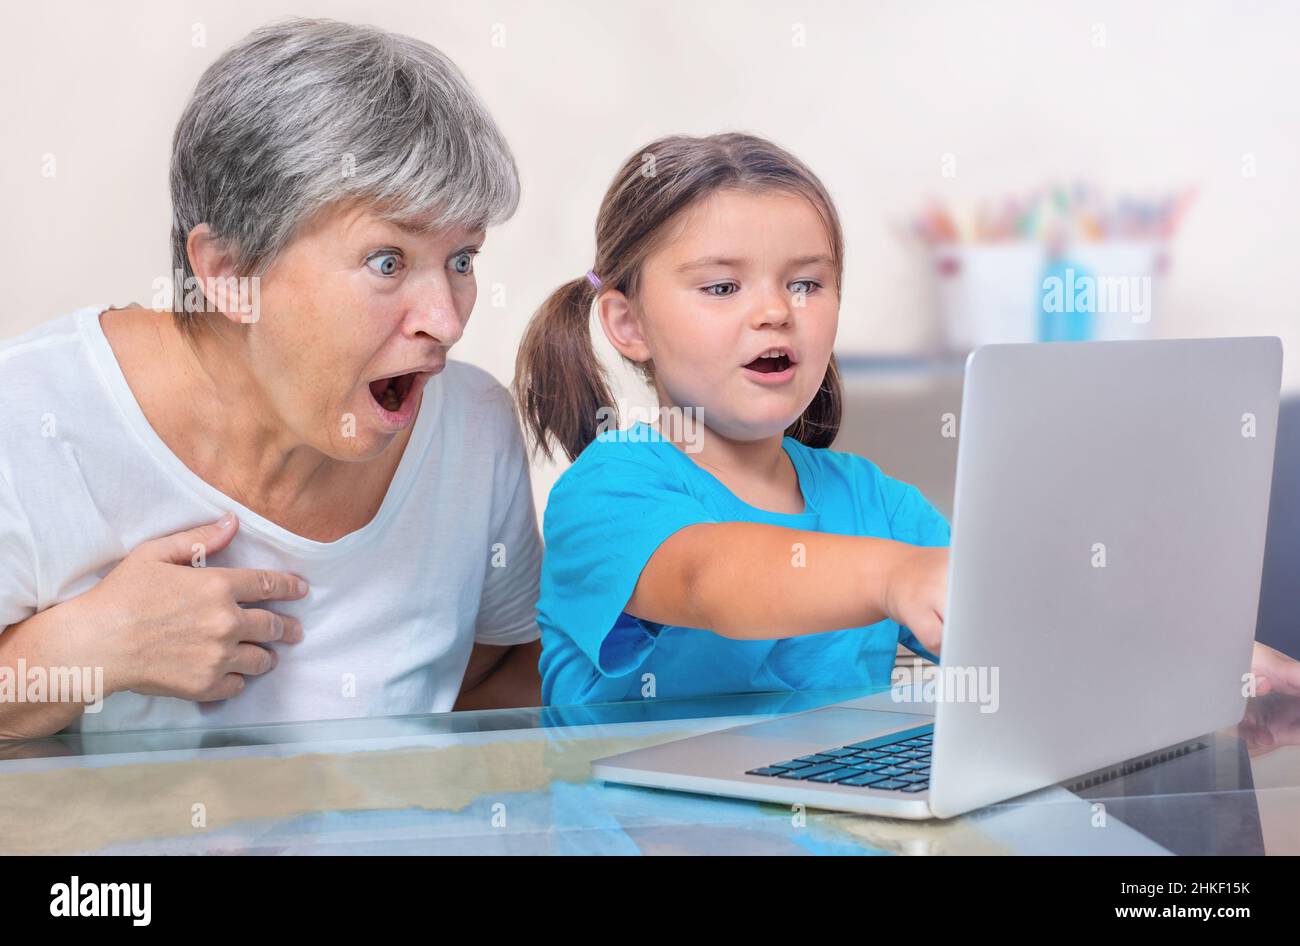 A child and a senior look at a laptop with delight and surprise Stock Photo